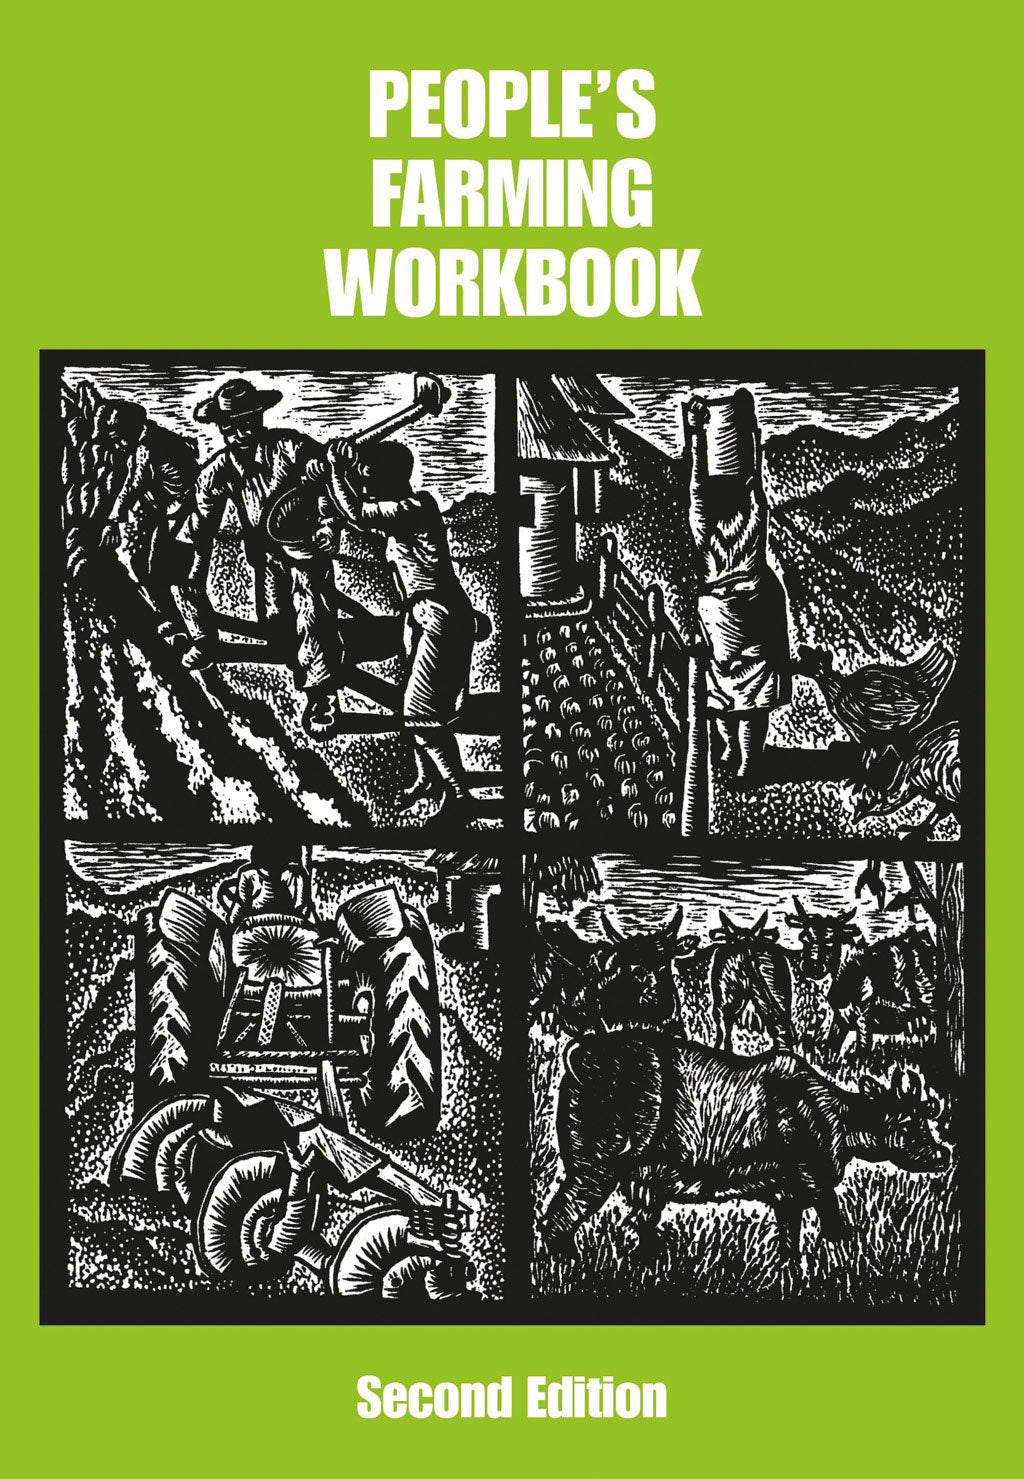 PEOPLE’S FARMING WORKBOOK (2nd Edition)